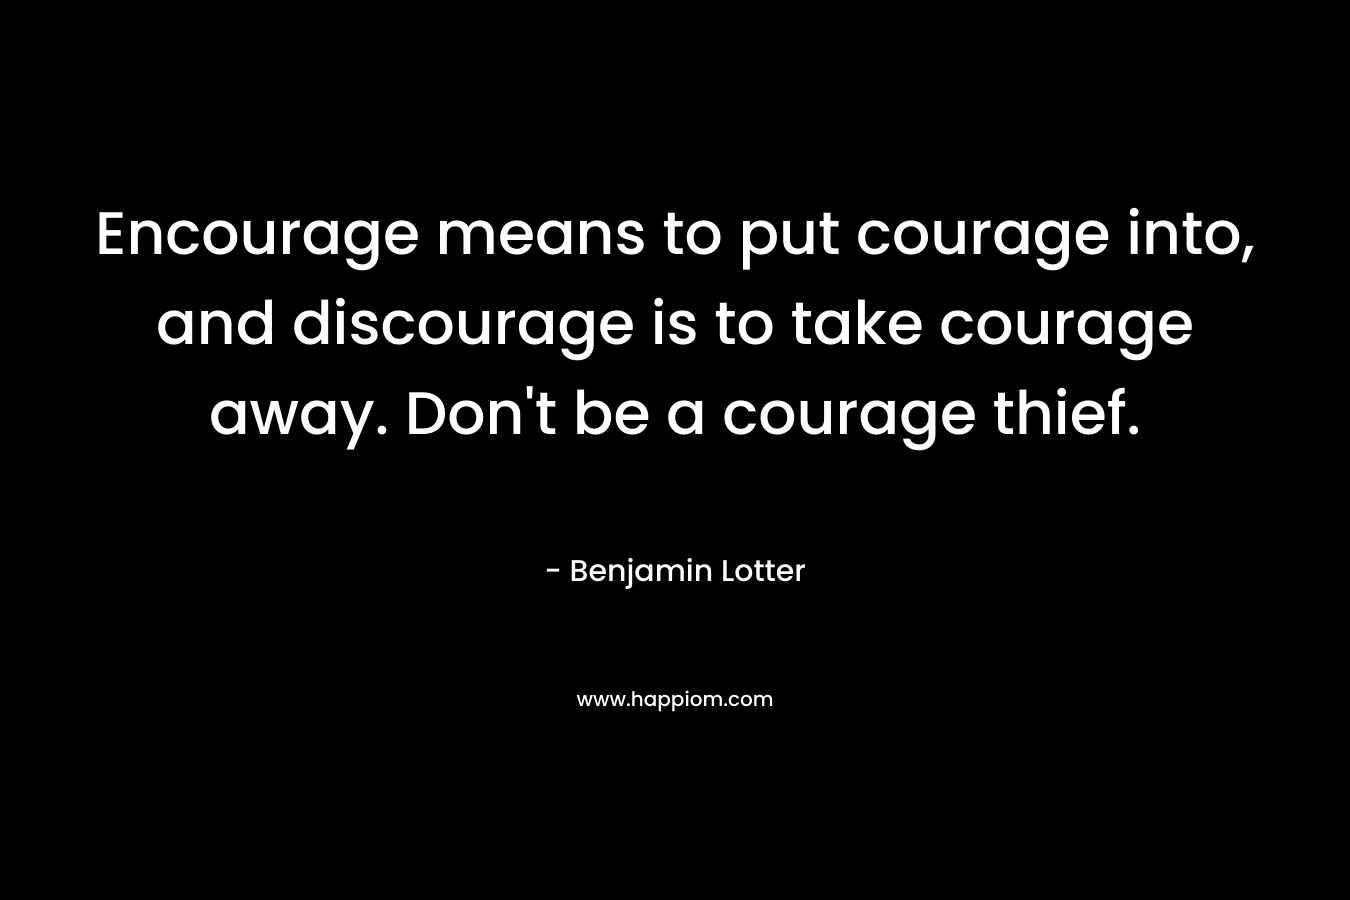 Encourage means to put courage into, and discourage is to take courage away. Don’t be a courage thief. – Benjamin Lotter